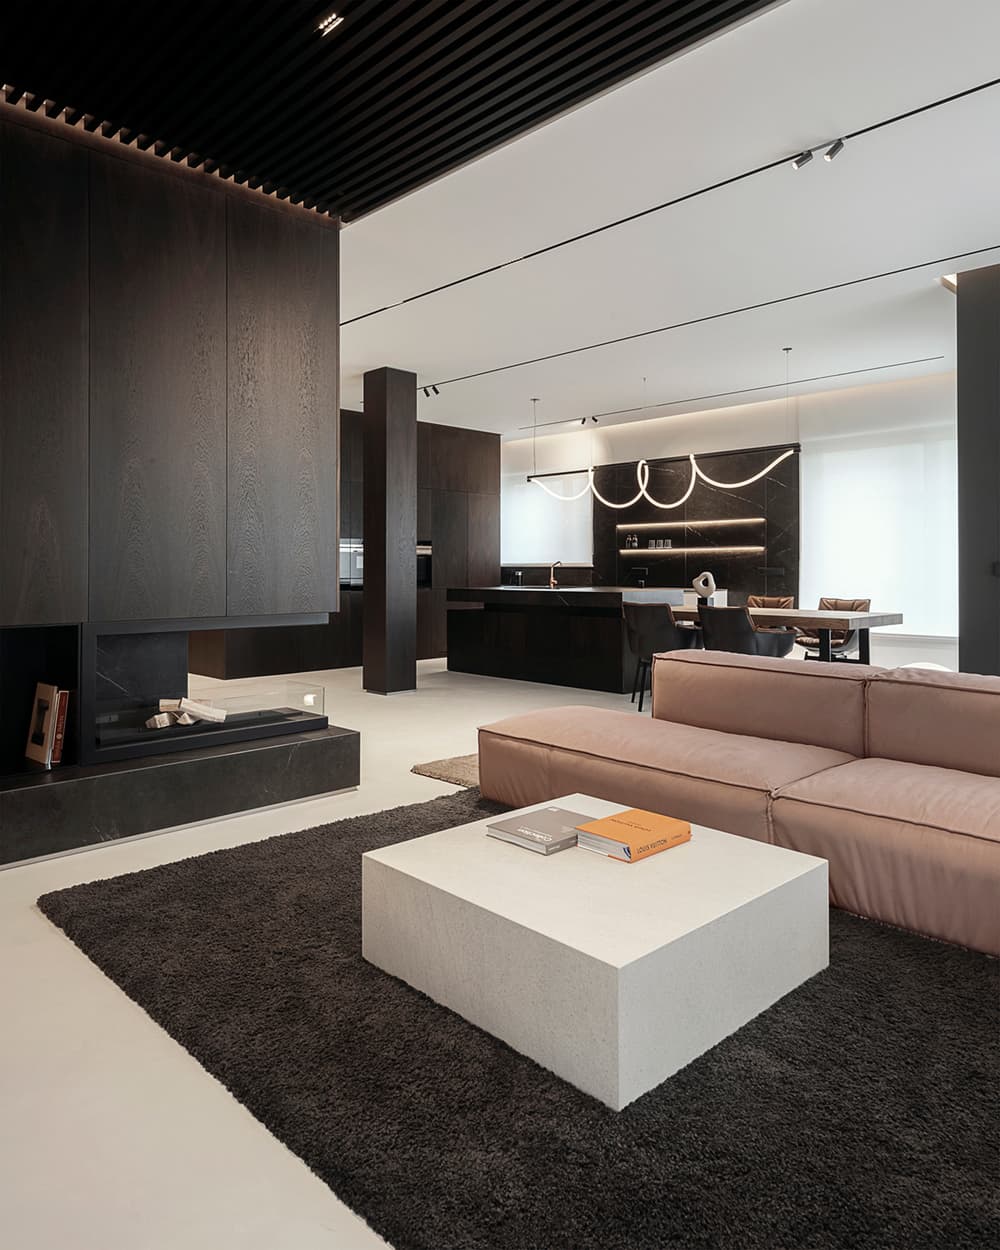 Apartment in Warsaw by hilight.design